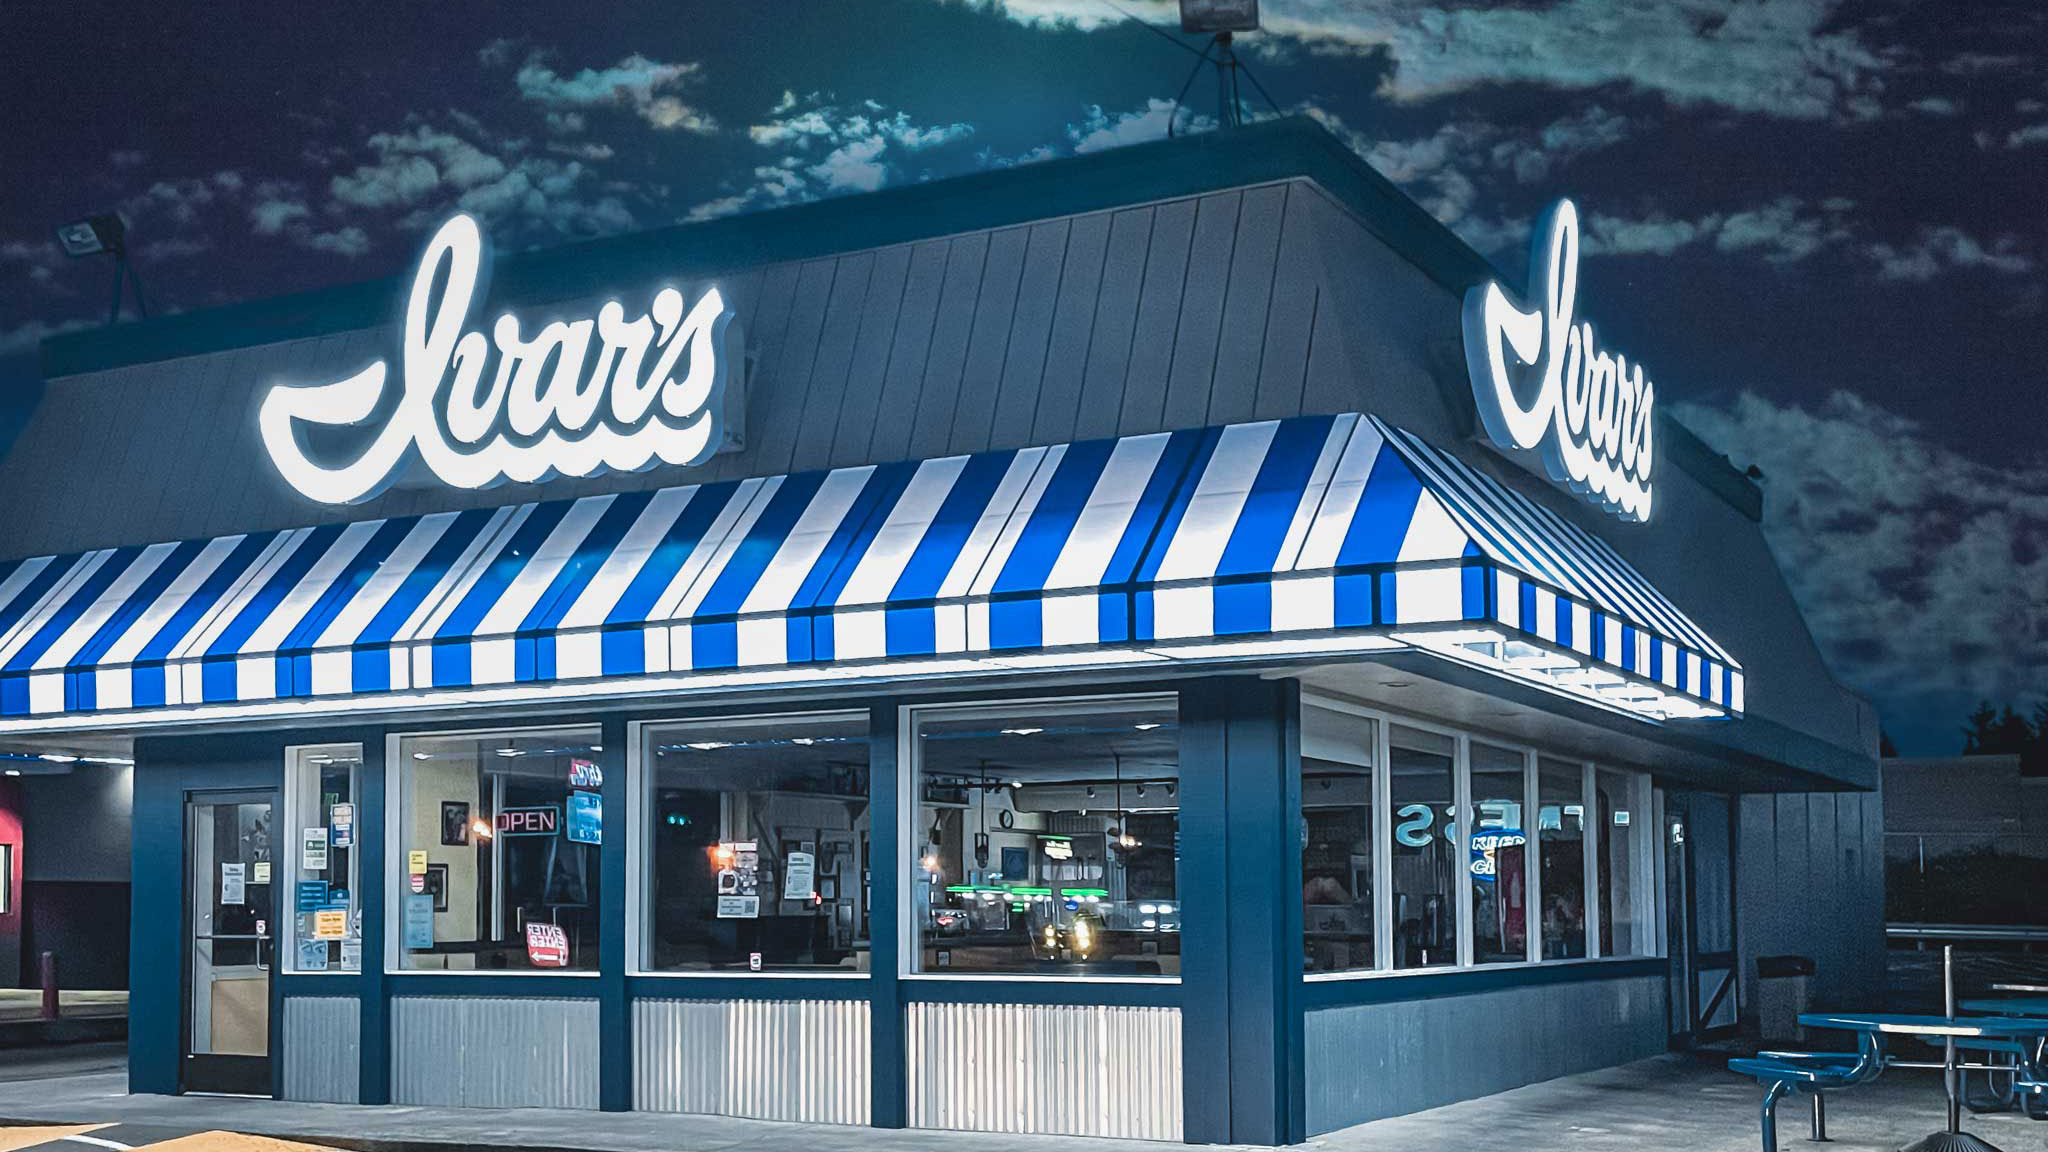 Ivar's Seafood Signs Plus Custom Awning and Canopies